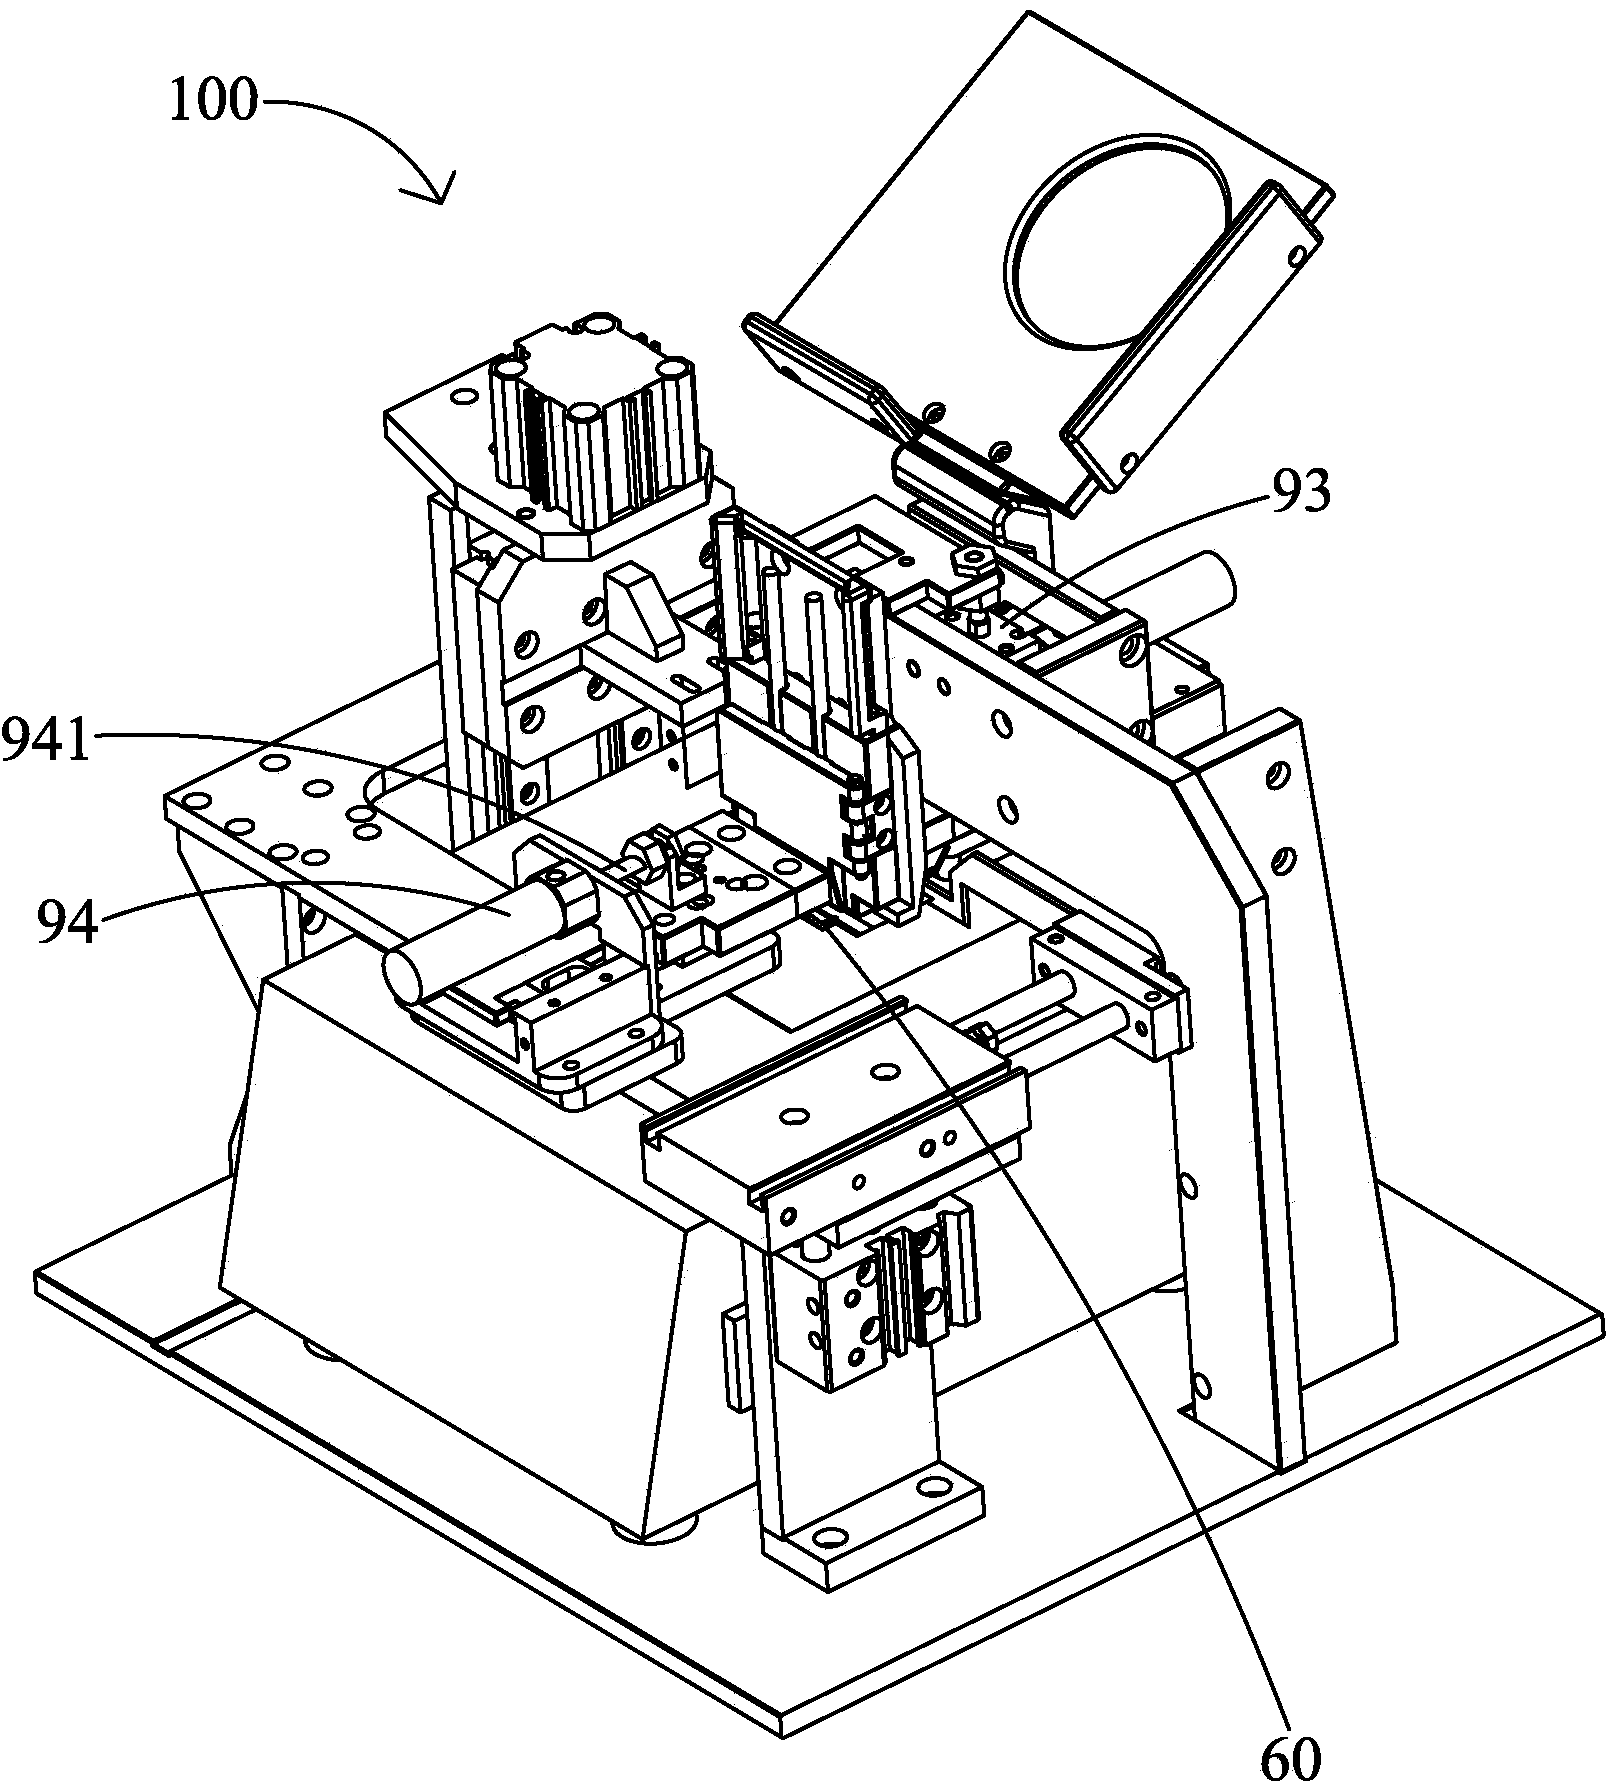 Cable weaving tin dipping device and method